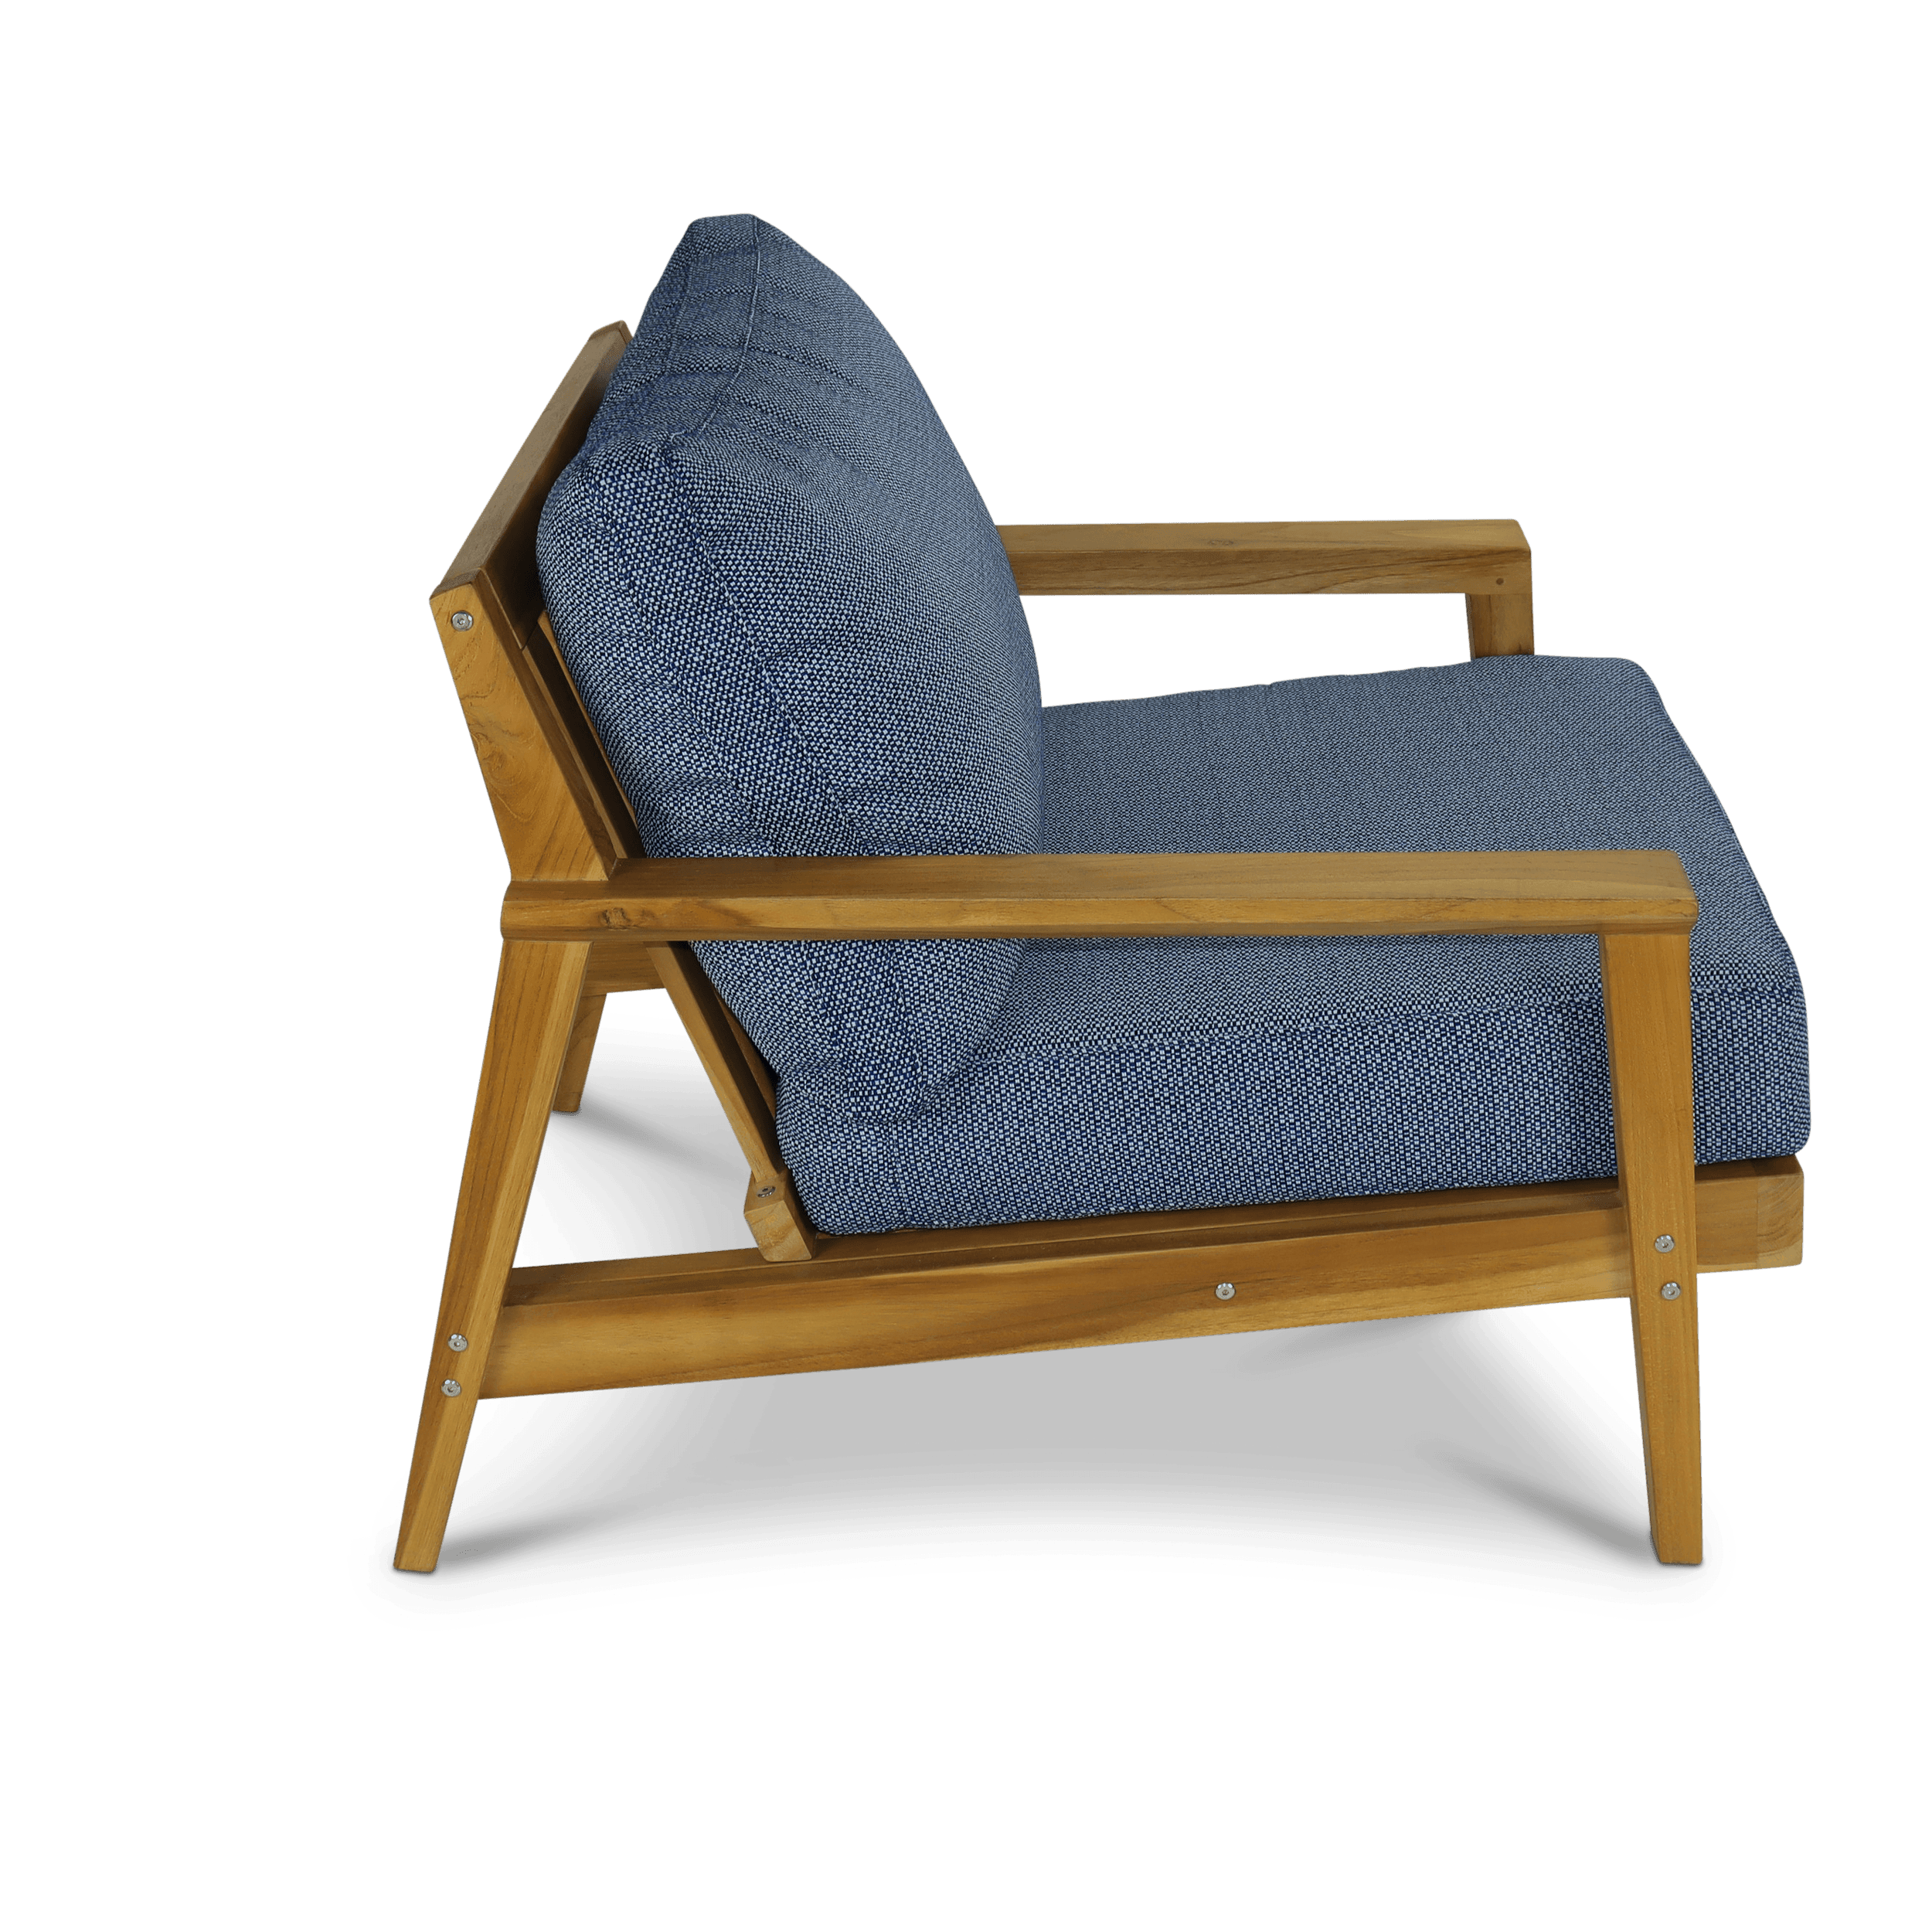 Riviera Armchair in Premium Natural Teak and Navy Check Sunproof All Weather Fabric - The Furniture Shack